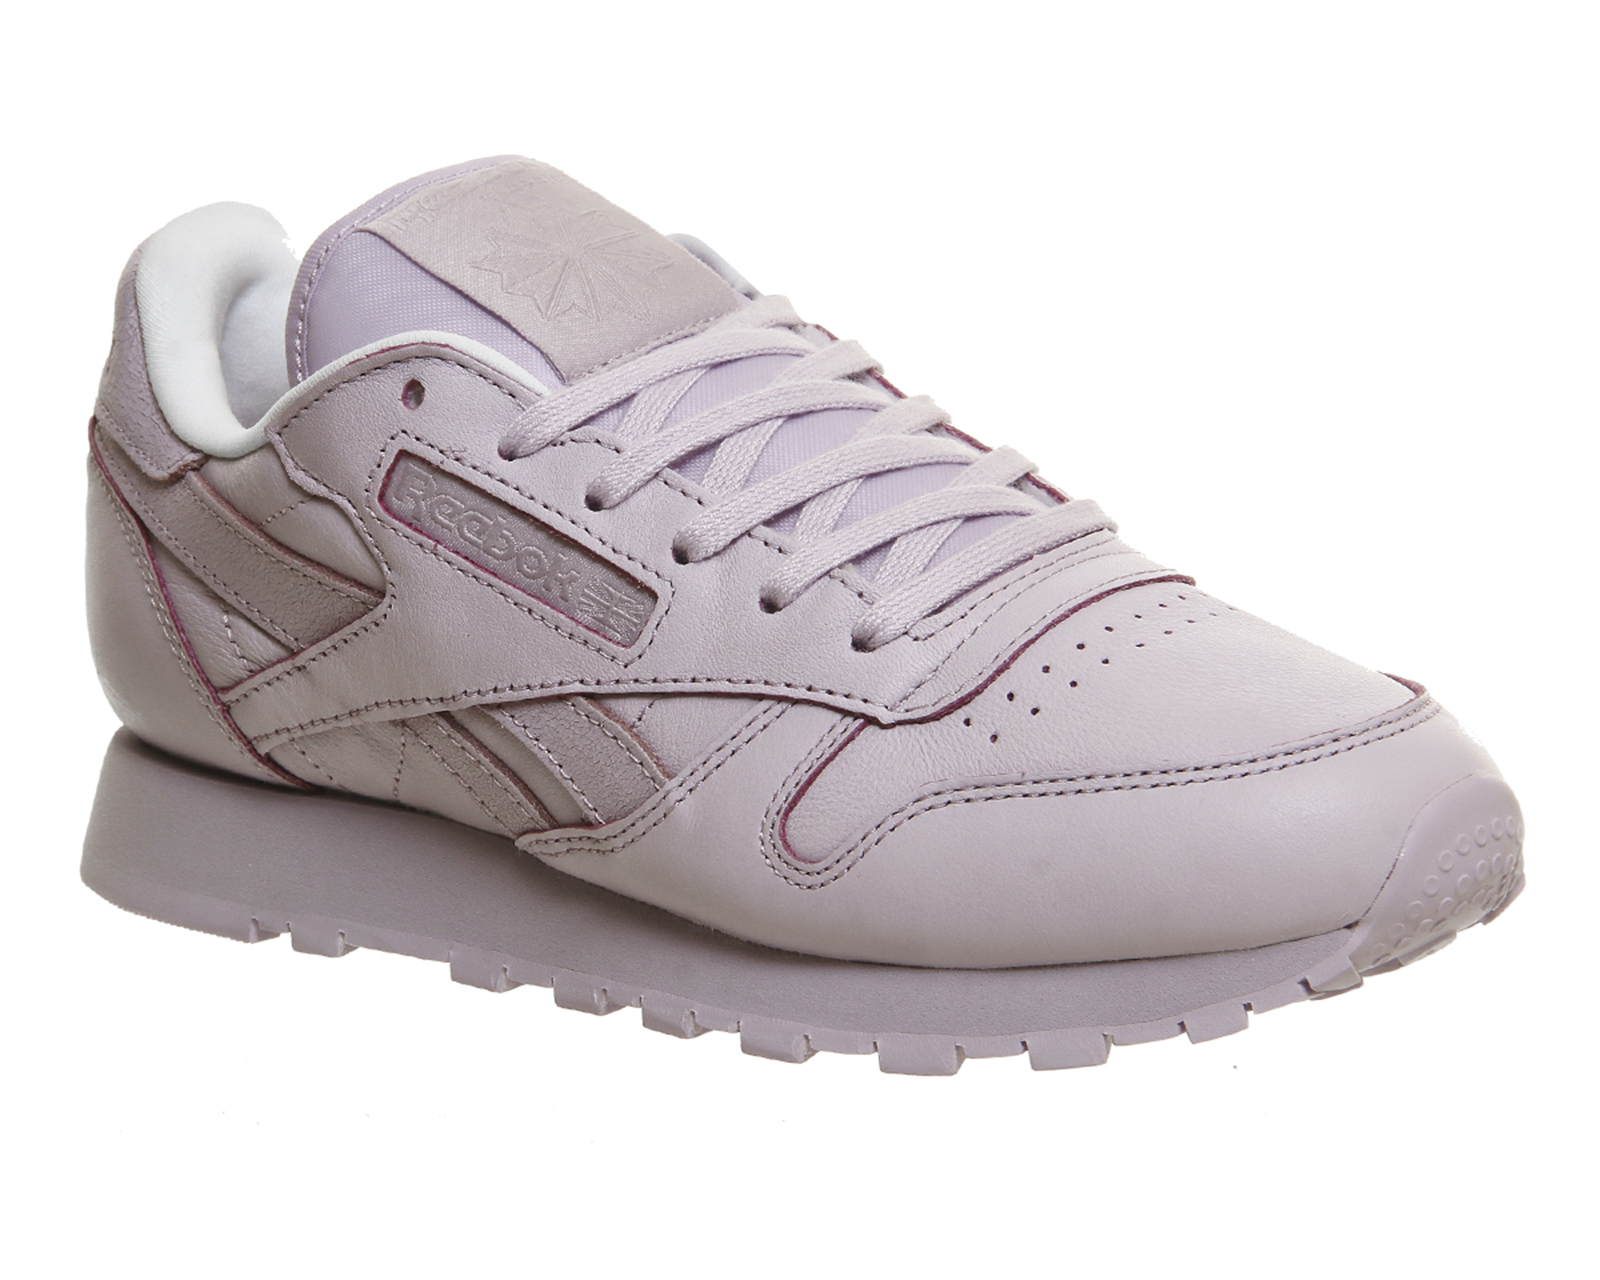 Reebok Classic Leather Lilac Ice White 